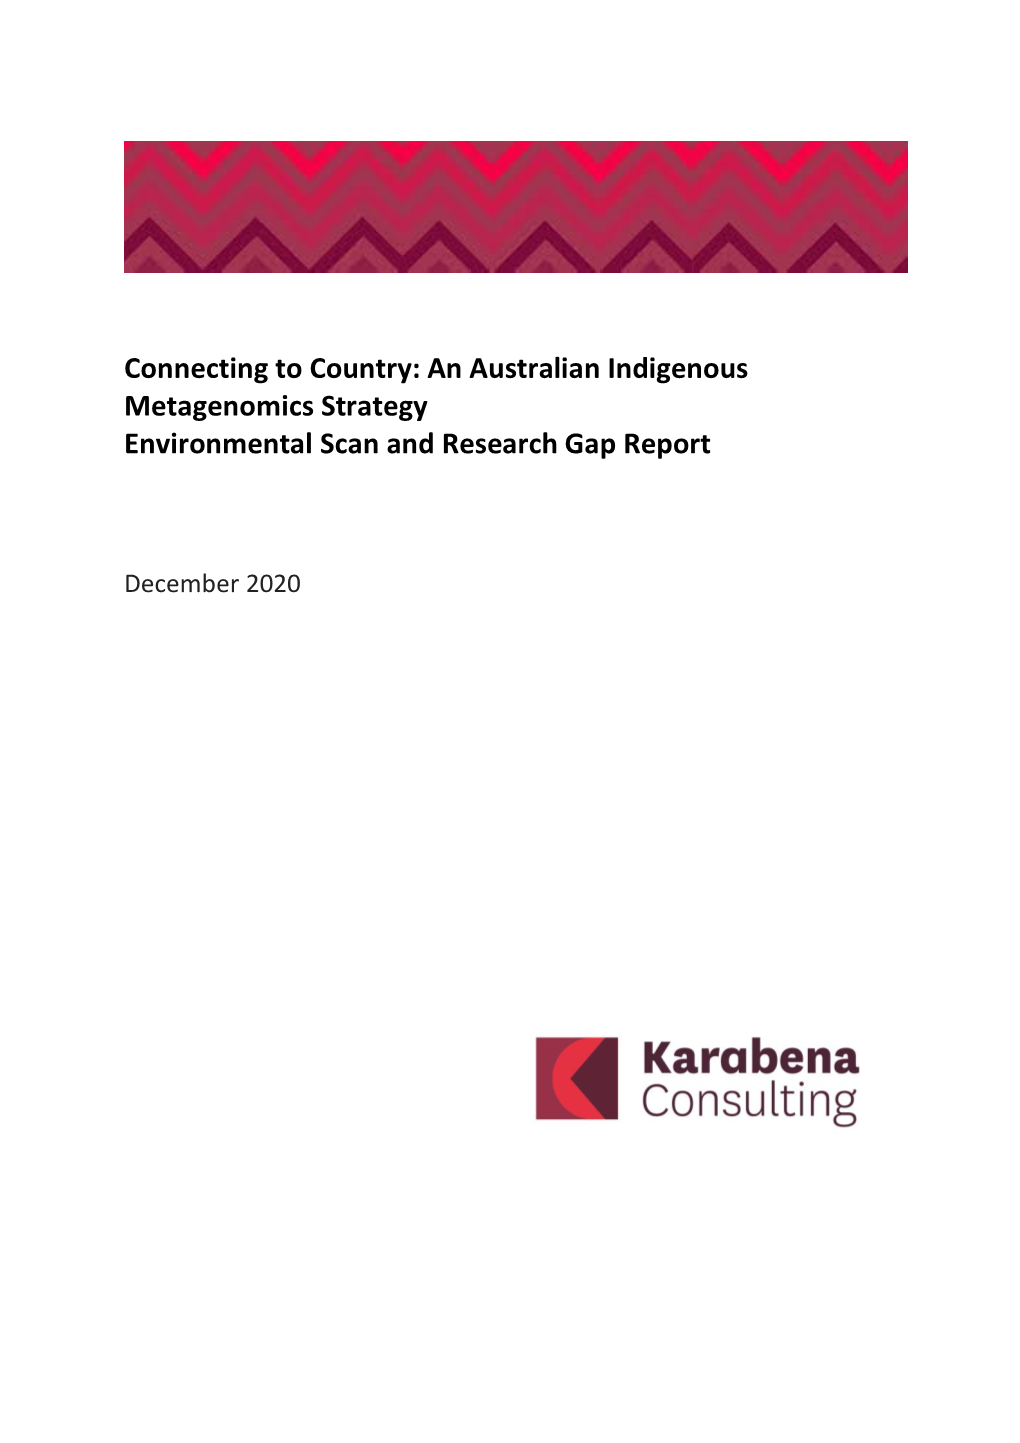 Connecting to Country: an Australian Indigenous Metagenomics Strategy Environmental Scan and Research Gap Report